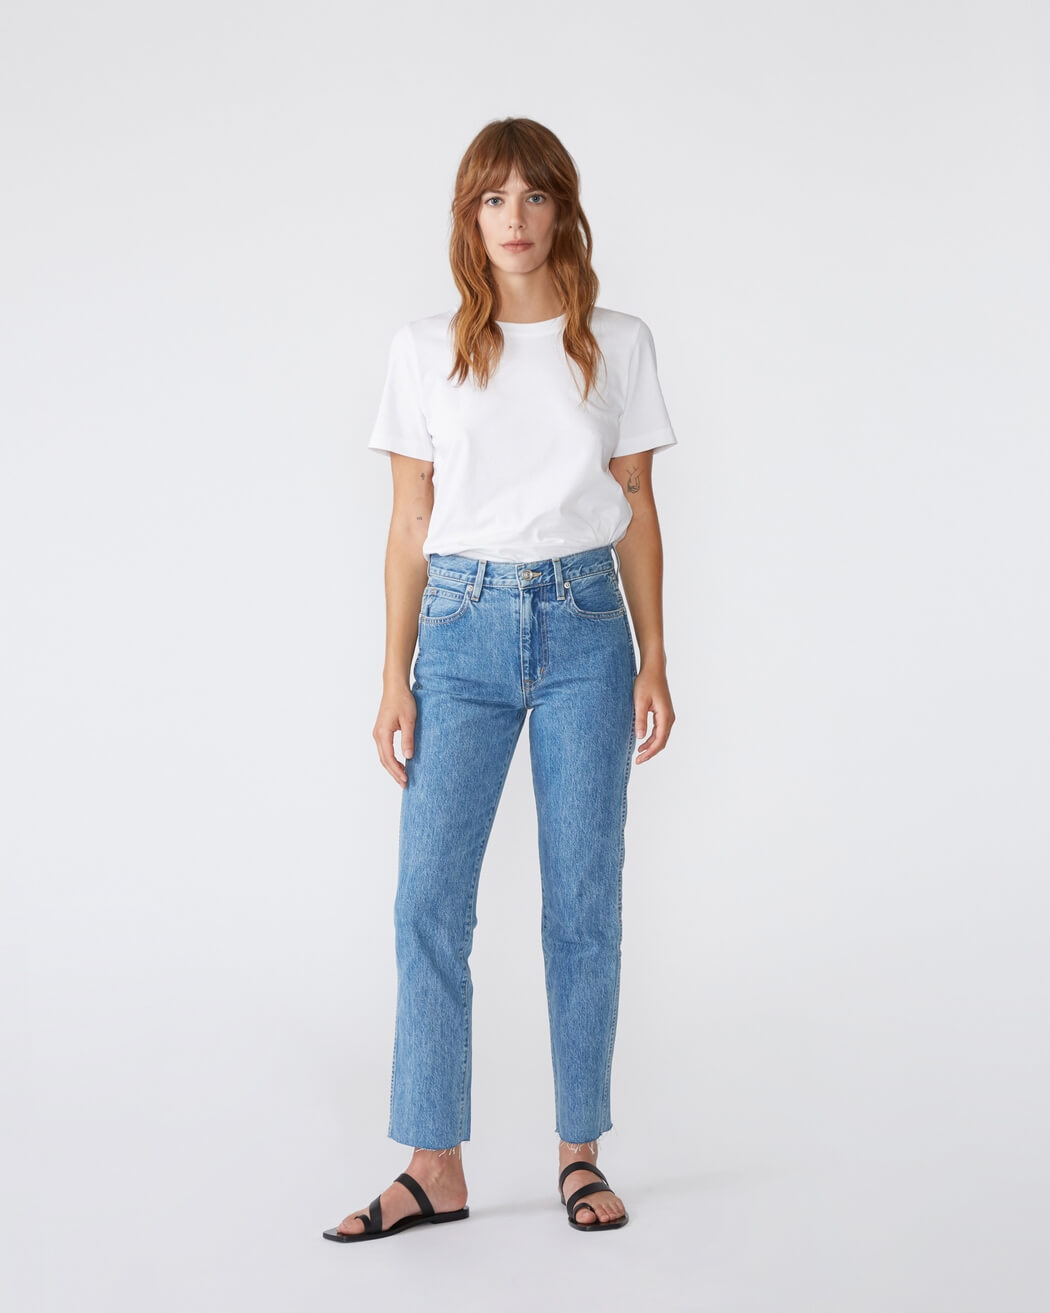 SLVRLAKE Hero High Rise Slim Leg Jean in Pacific from The New Trend